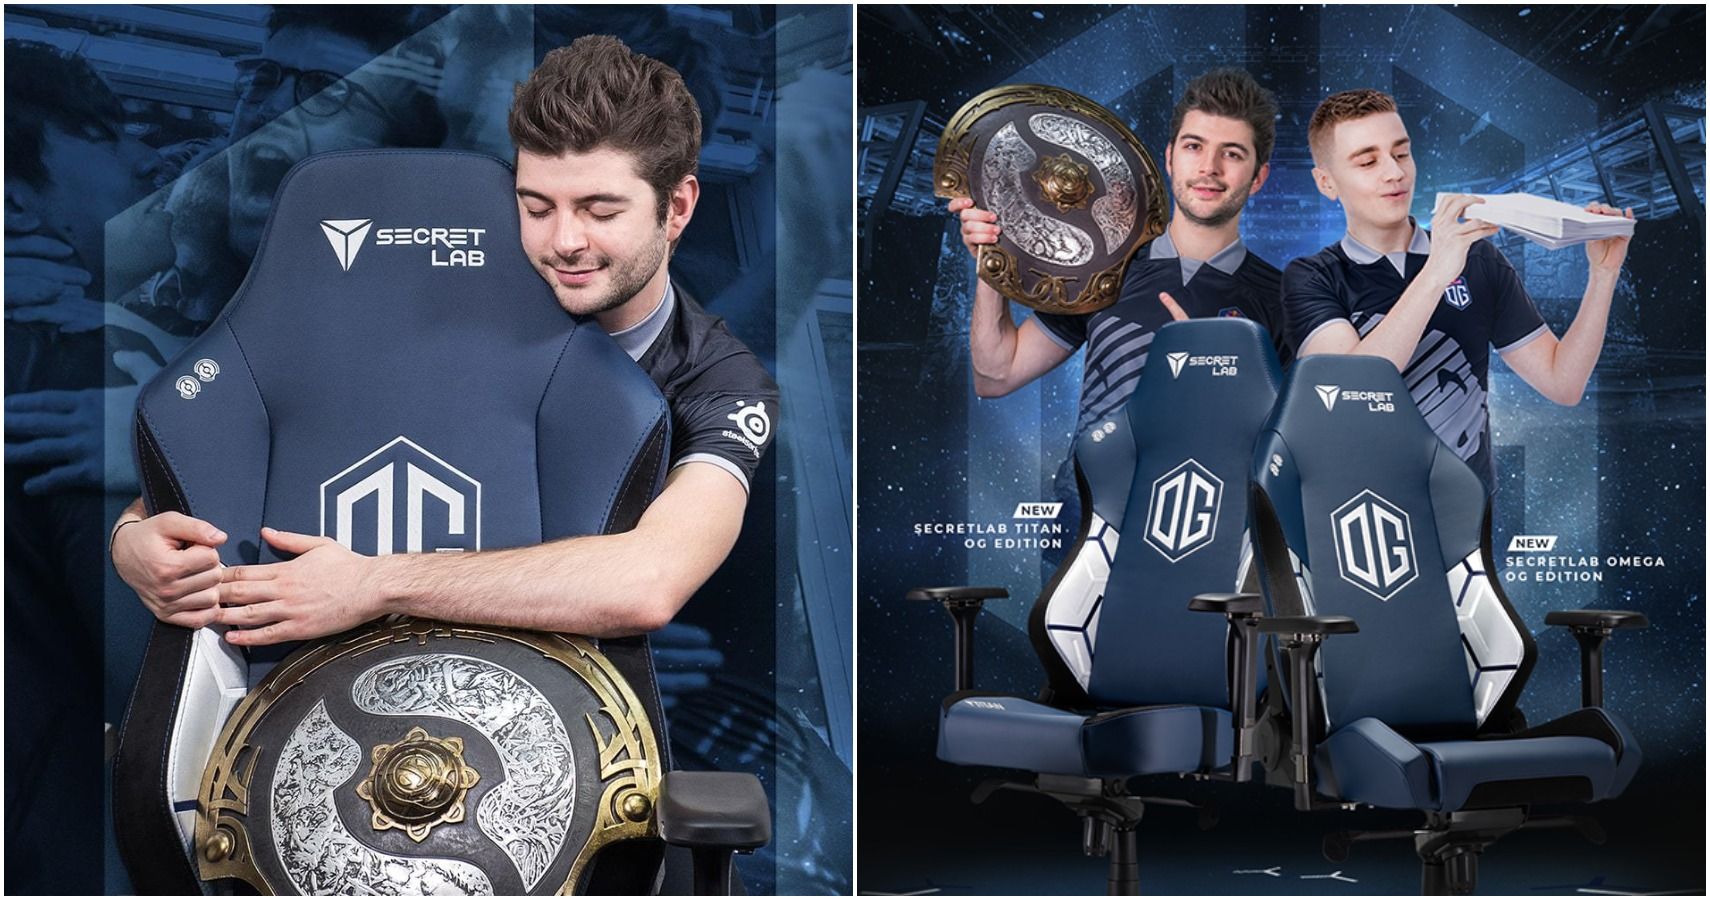 Secretlab Partners With Dota 2 World Champions For #DreamOG Edition Gaming Chair